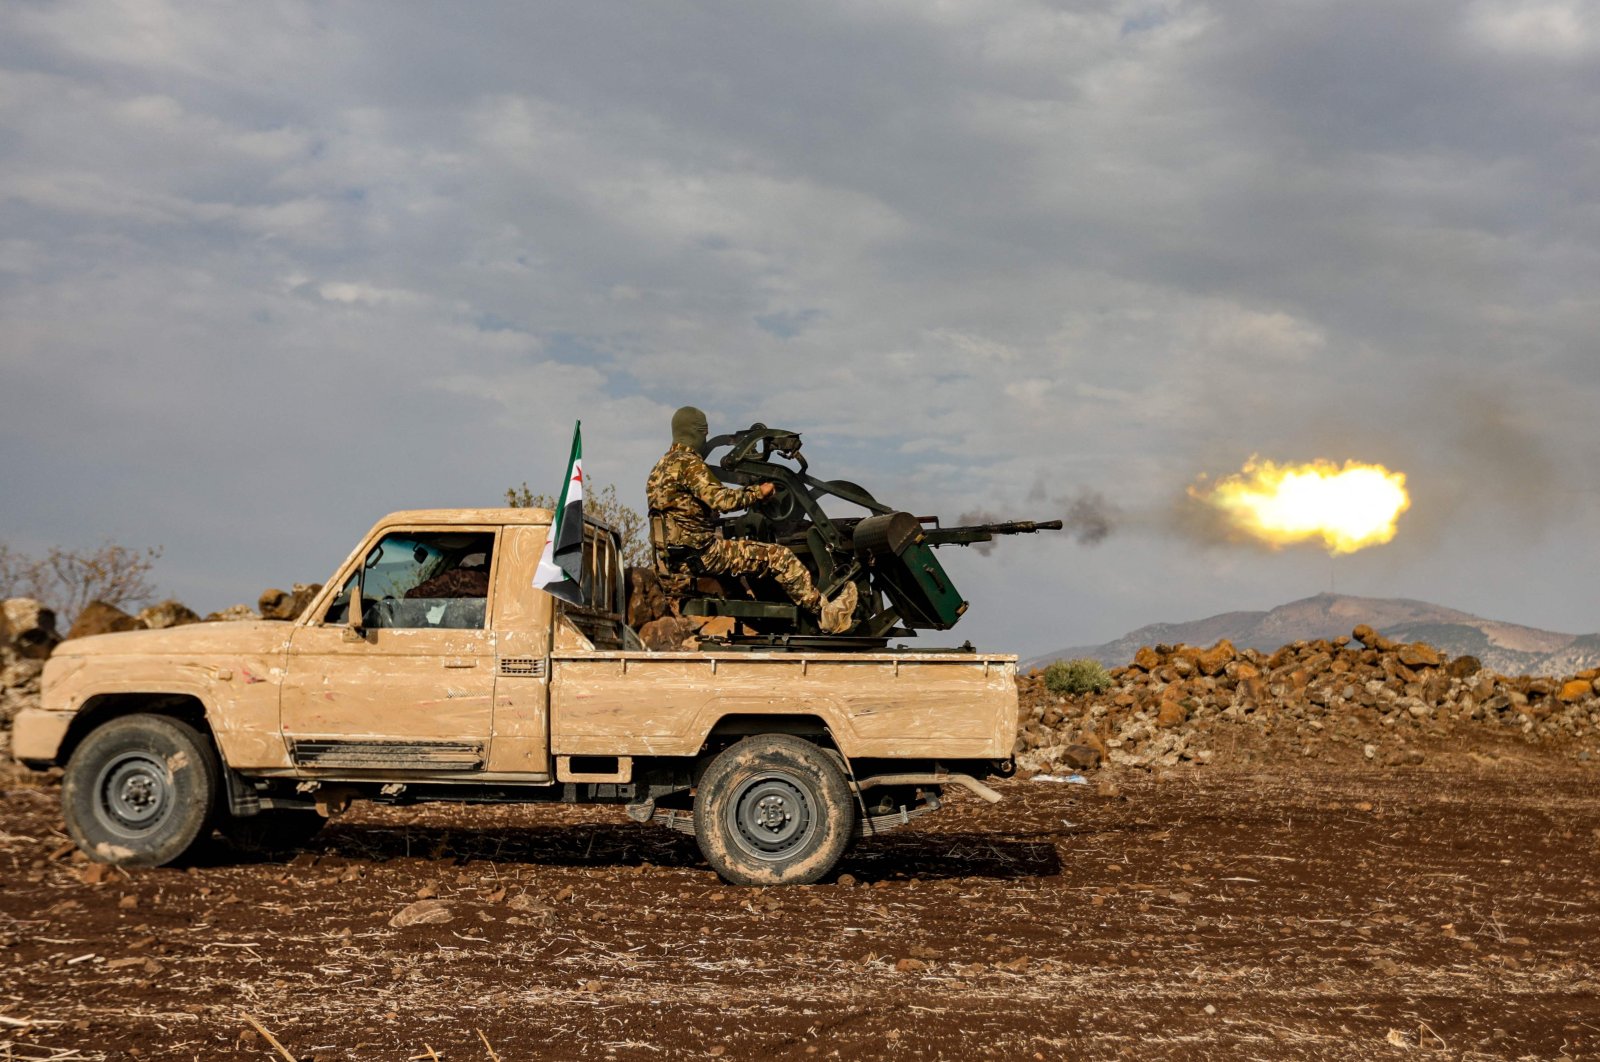 An opposition fighter fires a turret in the back of a &quot;technical&quot; vehicle during military drills by the &quot;Suleiman Shah Division&quot; in the opposition-held Afrin region of northern Syria, Nov. 22, 2022. (AFP Photo)